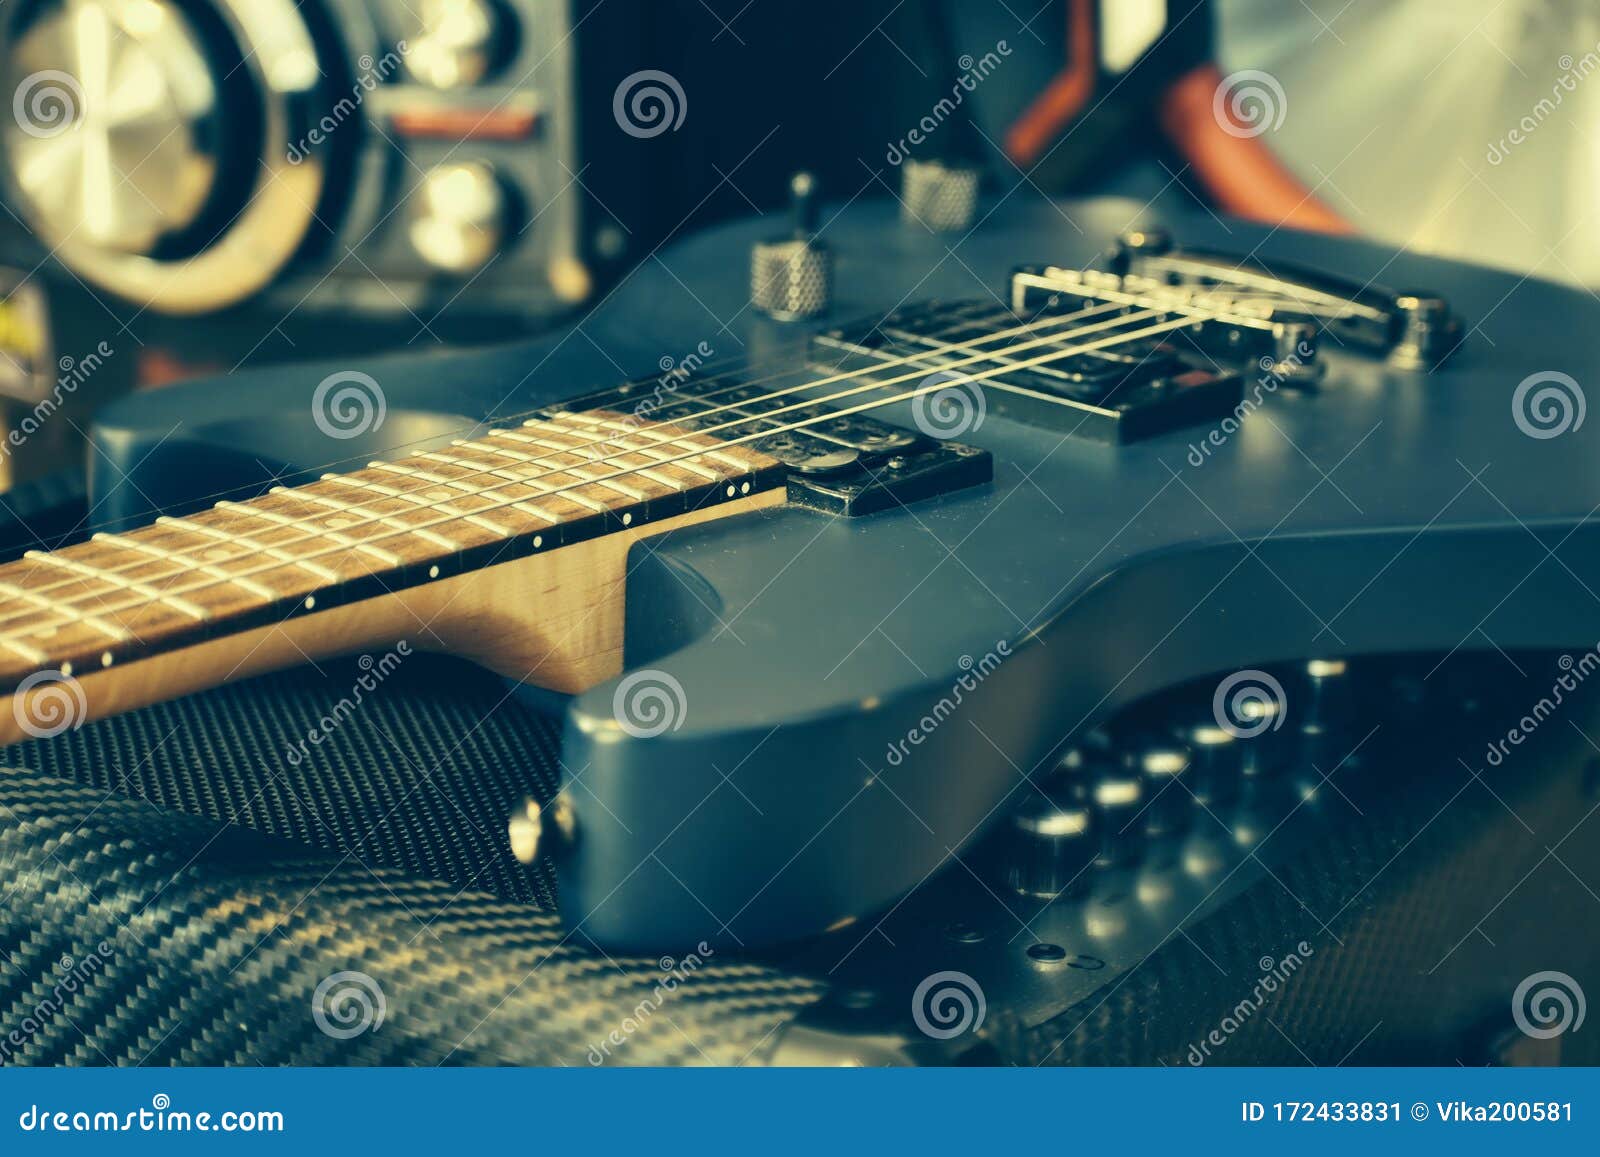 Electric Guitar Wallpaper. Blur. Background Music. Lessons of Guitar  Playing. String Melody. the Strings of a Musical Instrument Stock Image -  Image of chord, player: 172433831